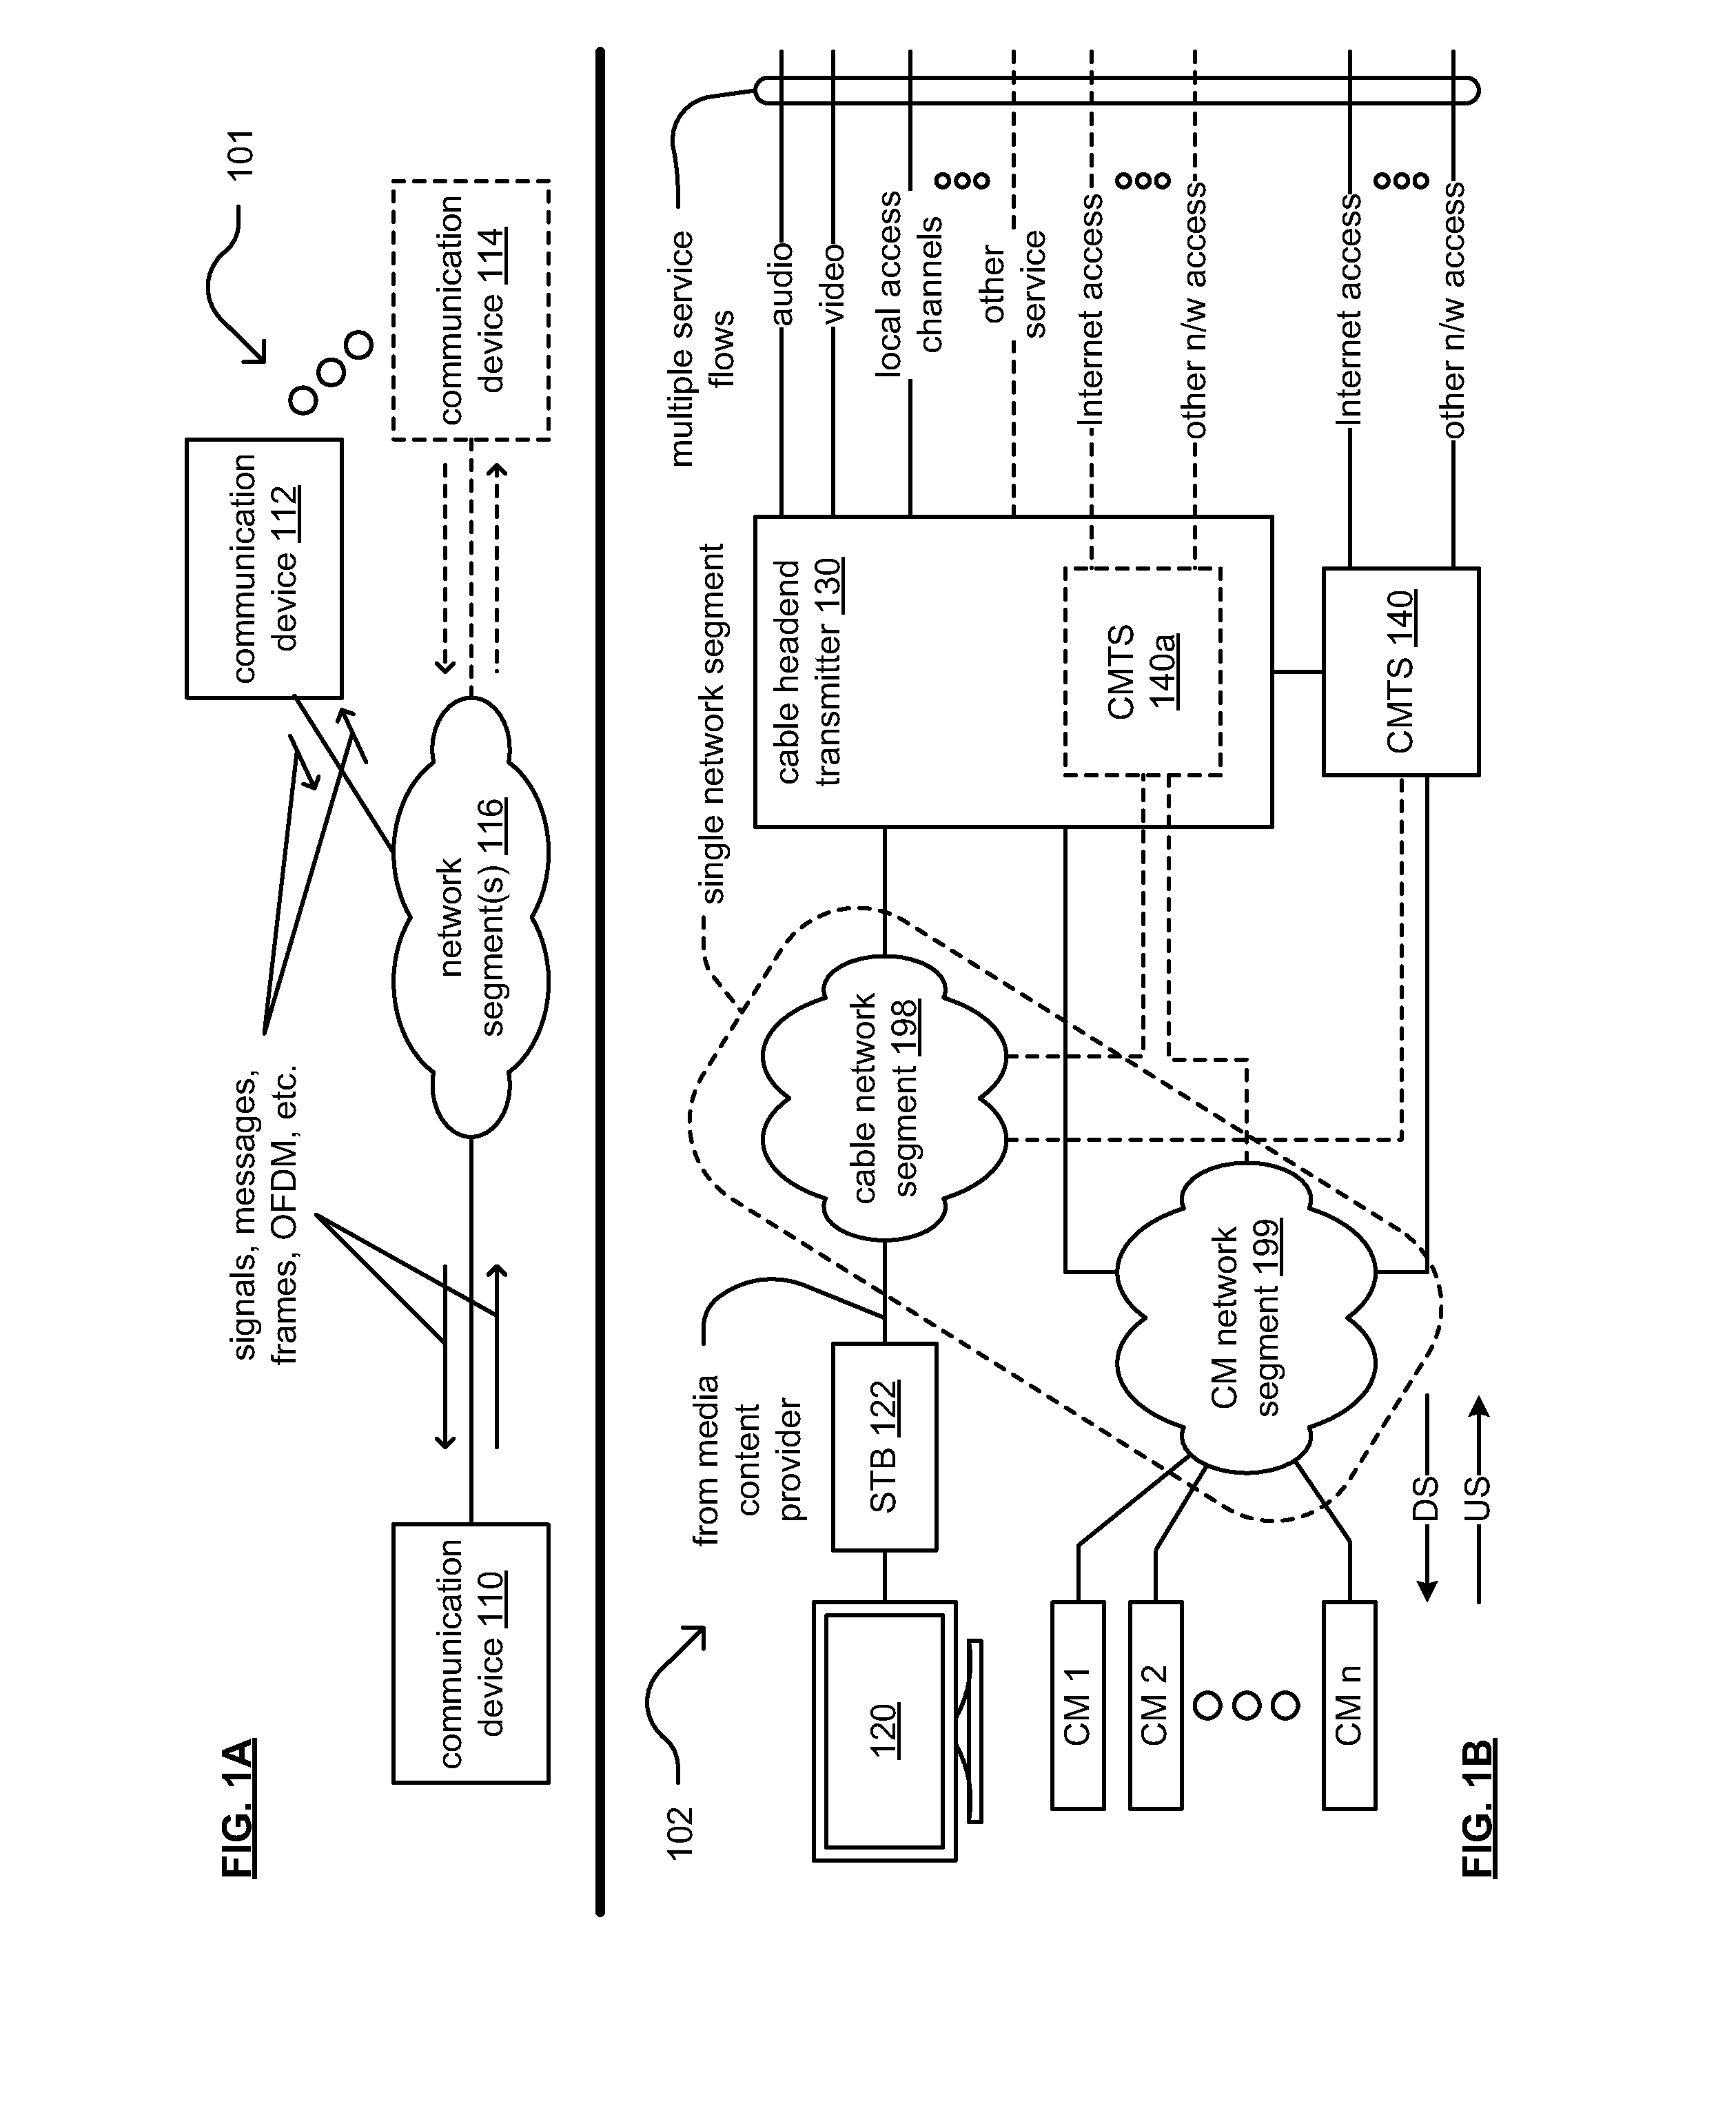 Inband spurious detection and processing within communication systems